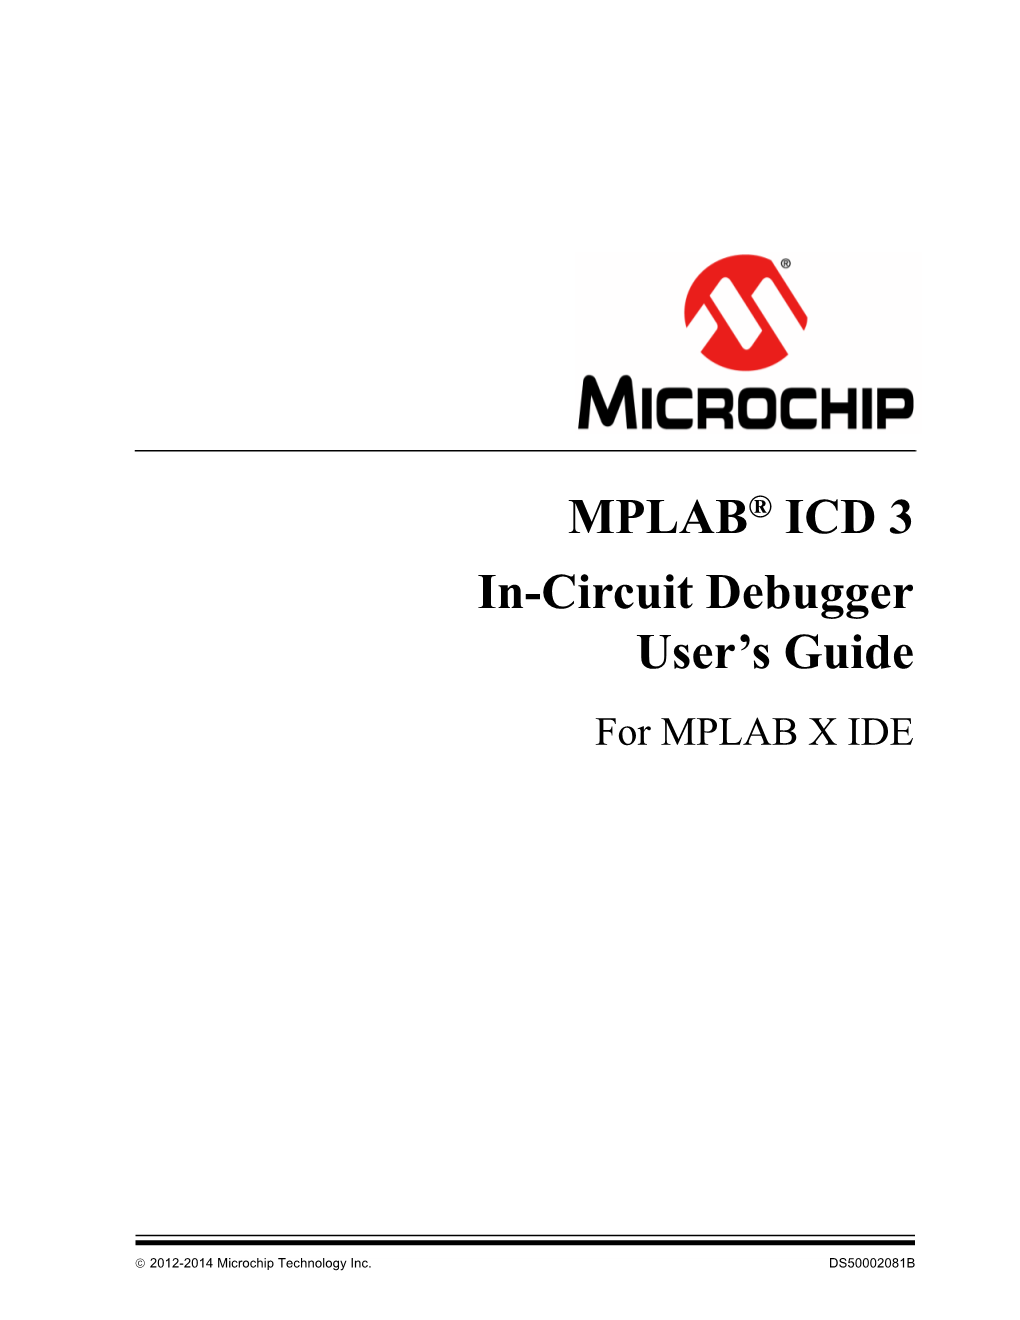 MPLAB ICD 3 User's Guide